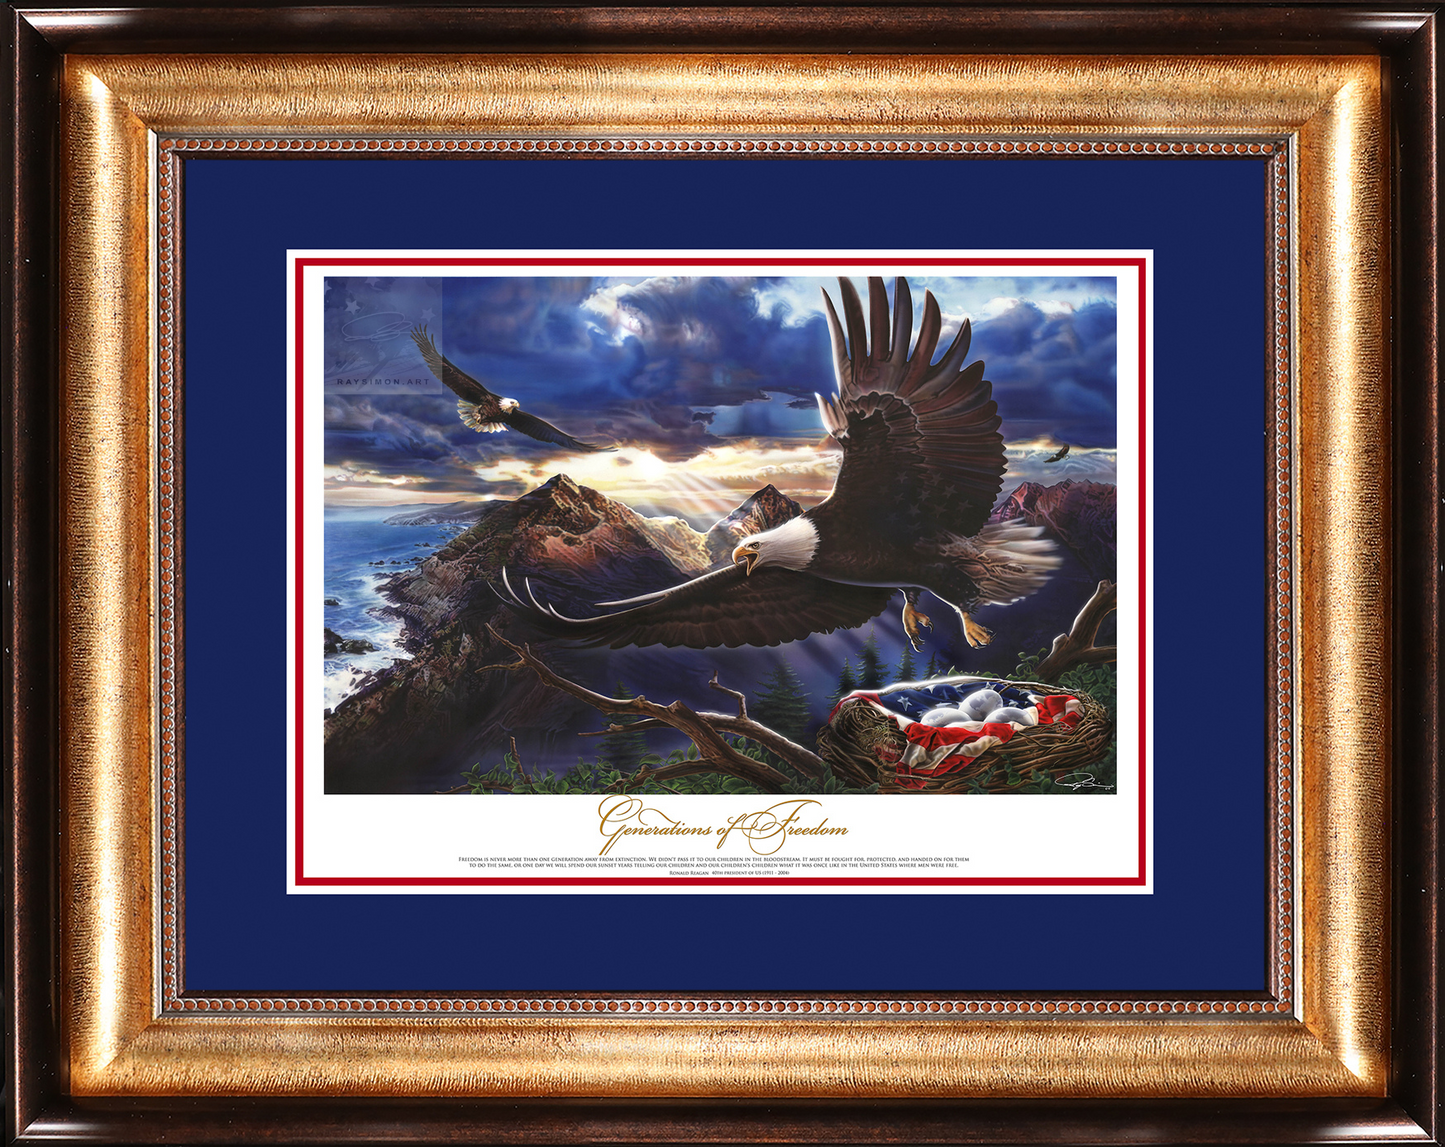 American Bald Eagle Painting - 'Generations of Freedom'